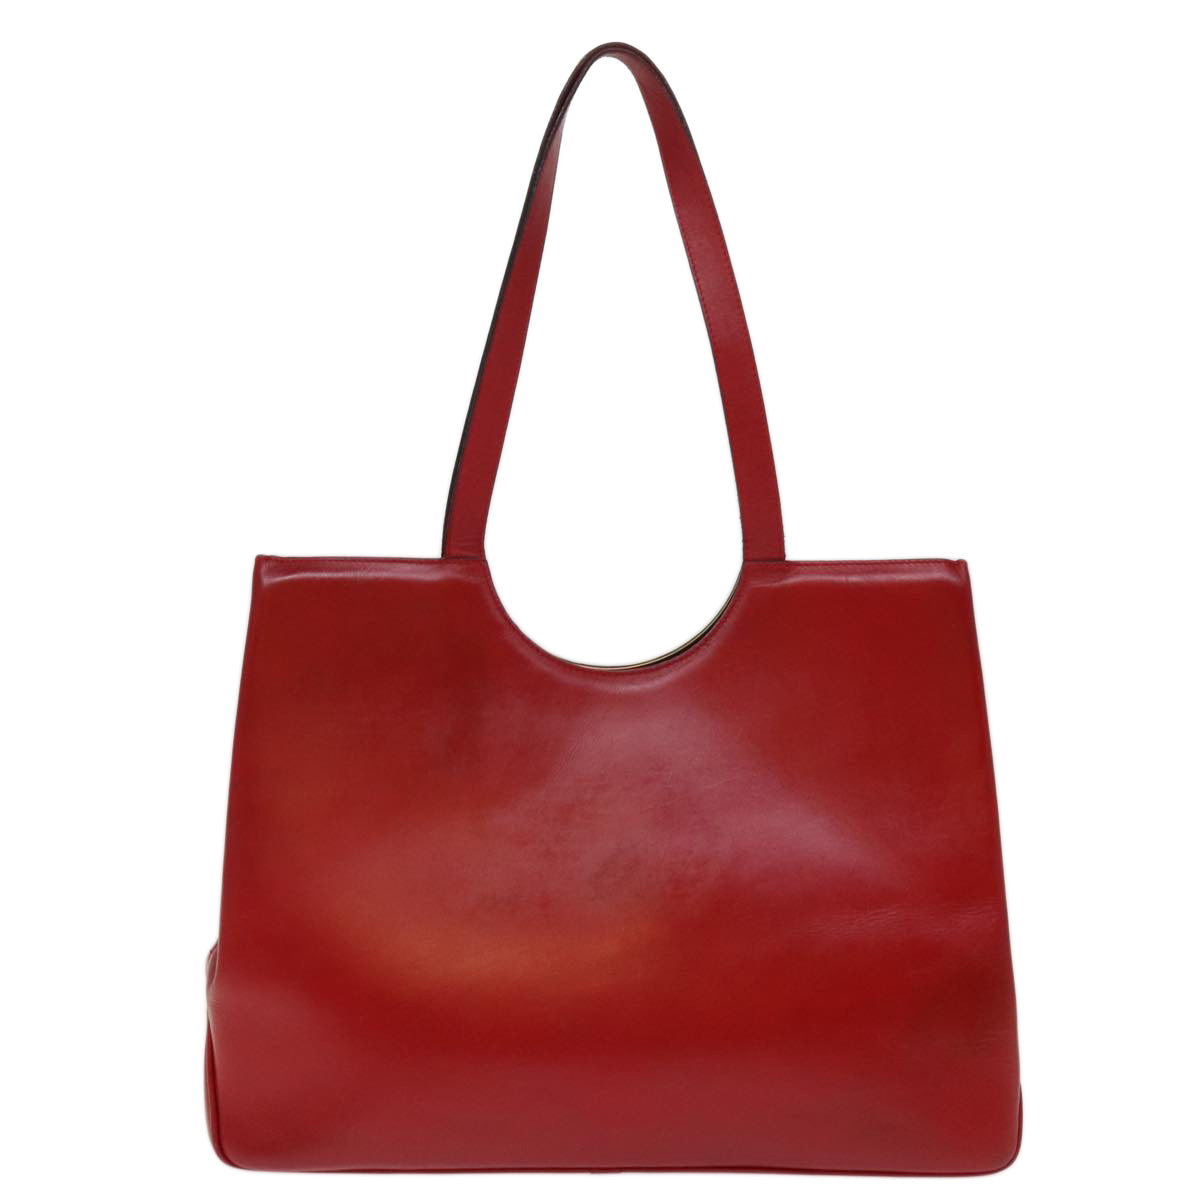 CELINE Tote Bag Leather Red Auth 74549 - 0